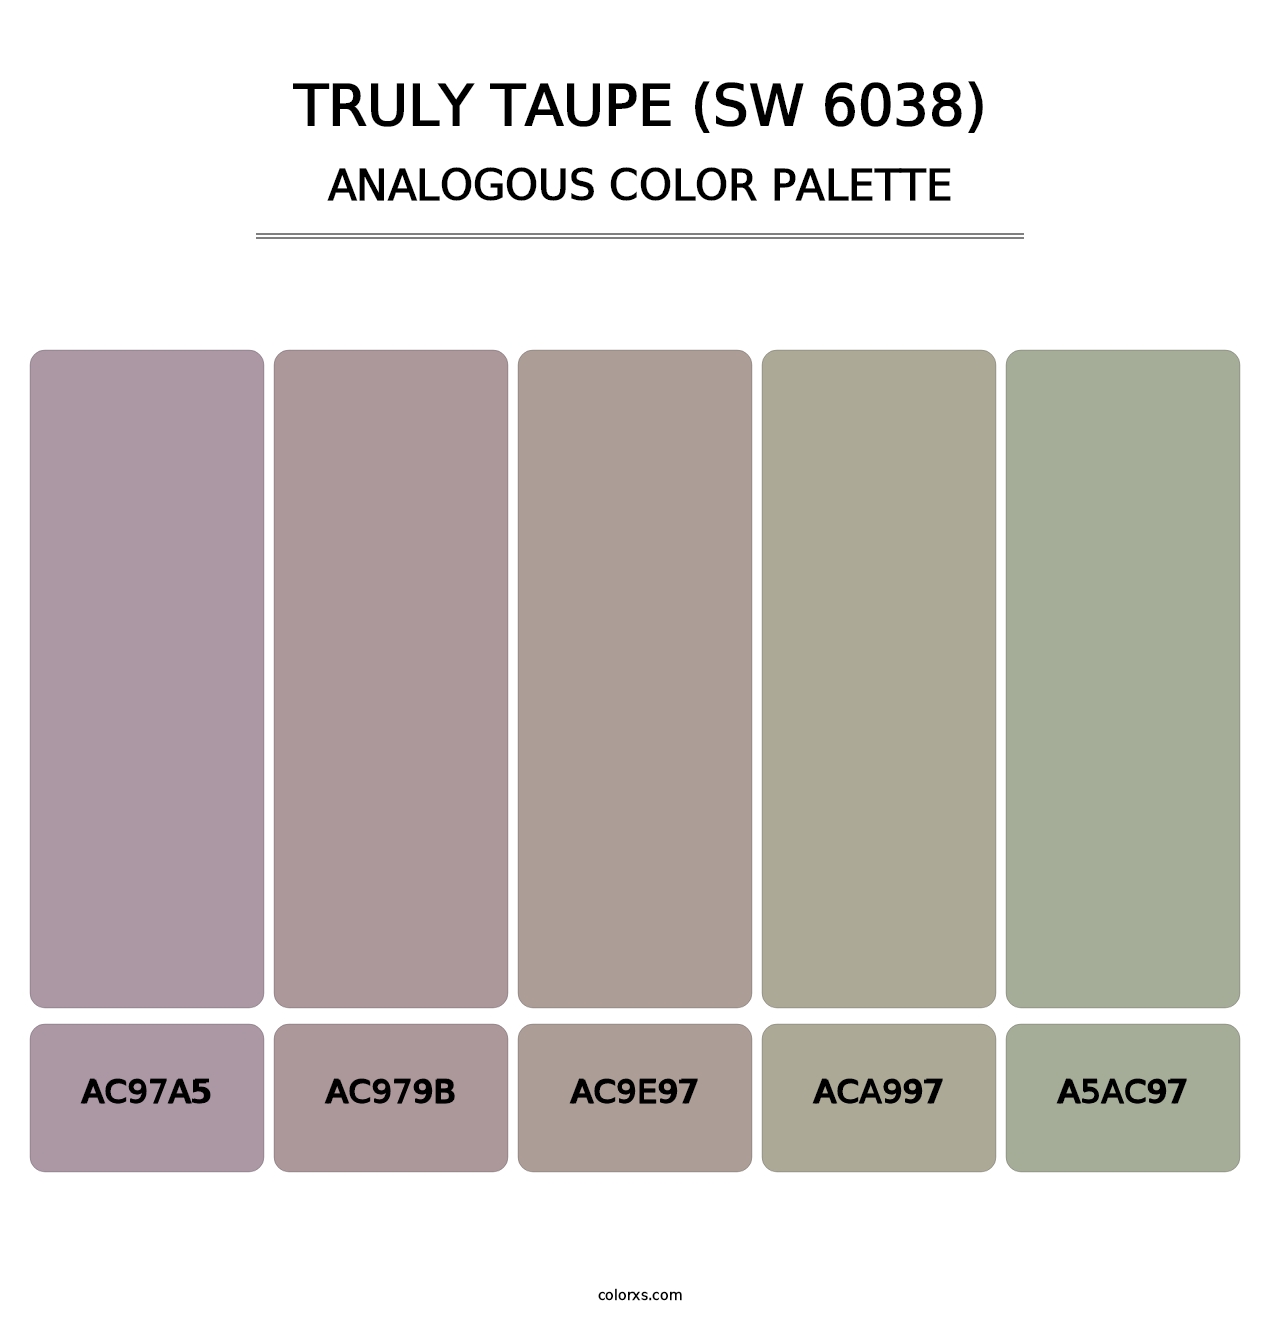 Truly Taupe (SW 6038) - Analogous Color Palette